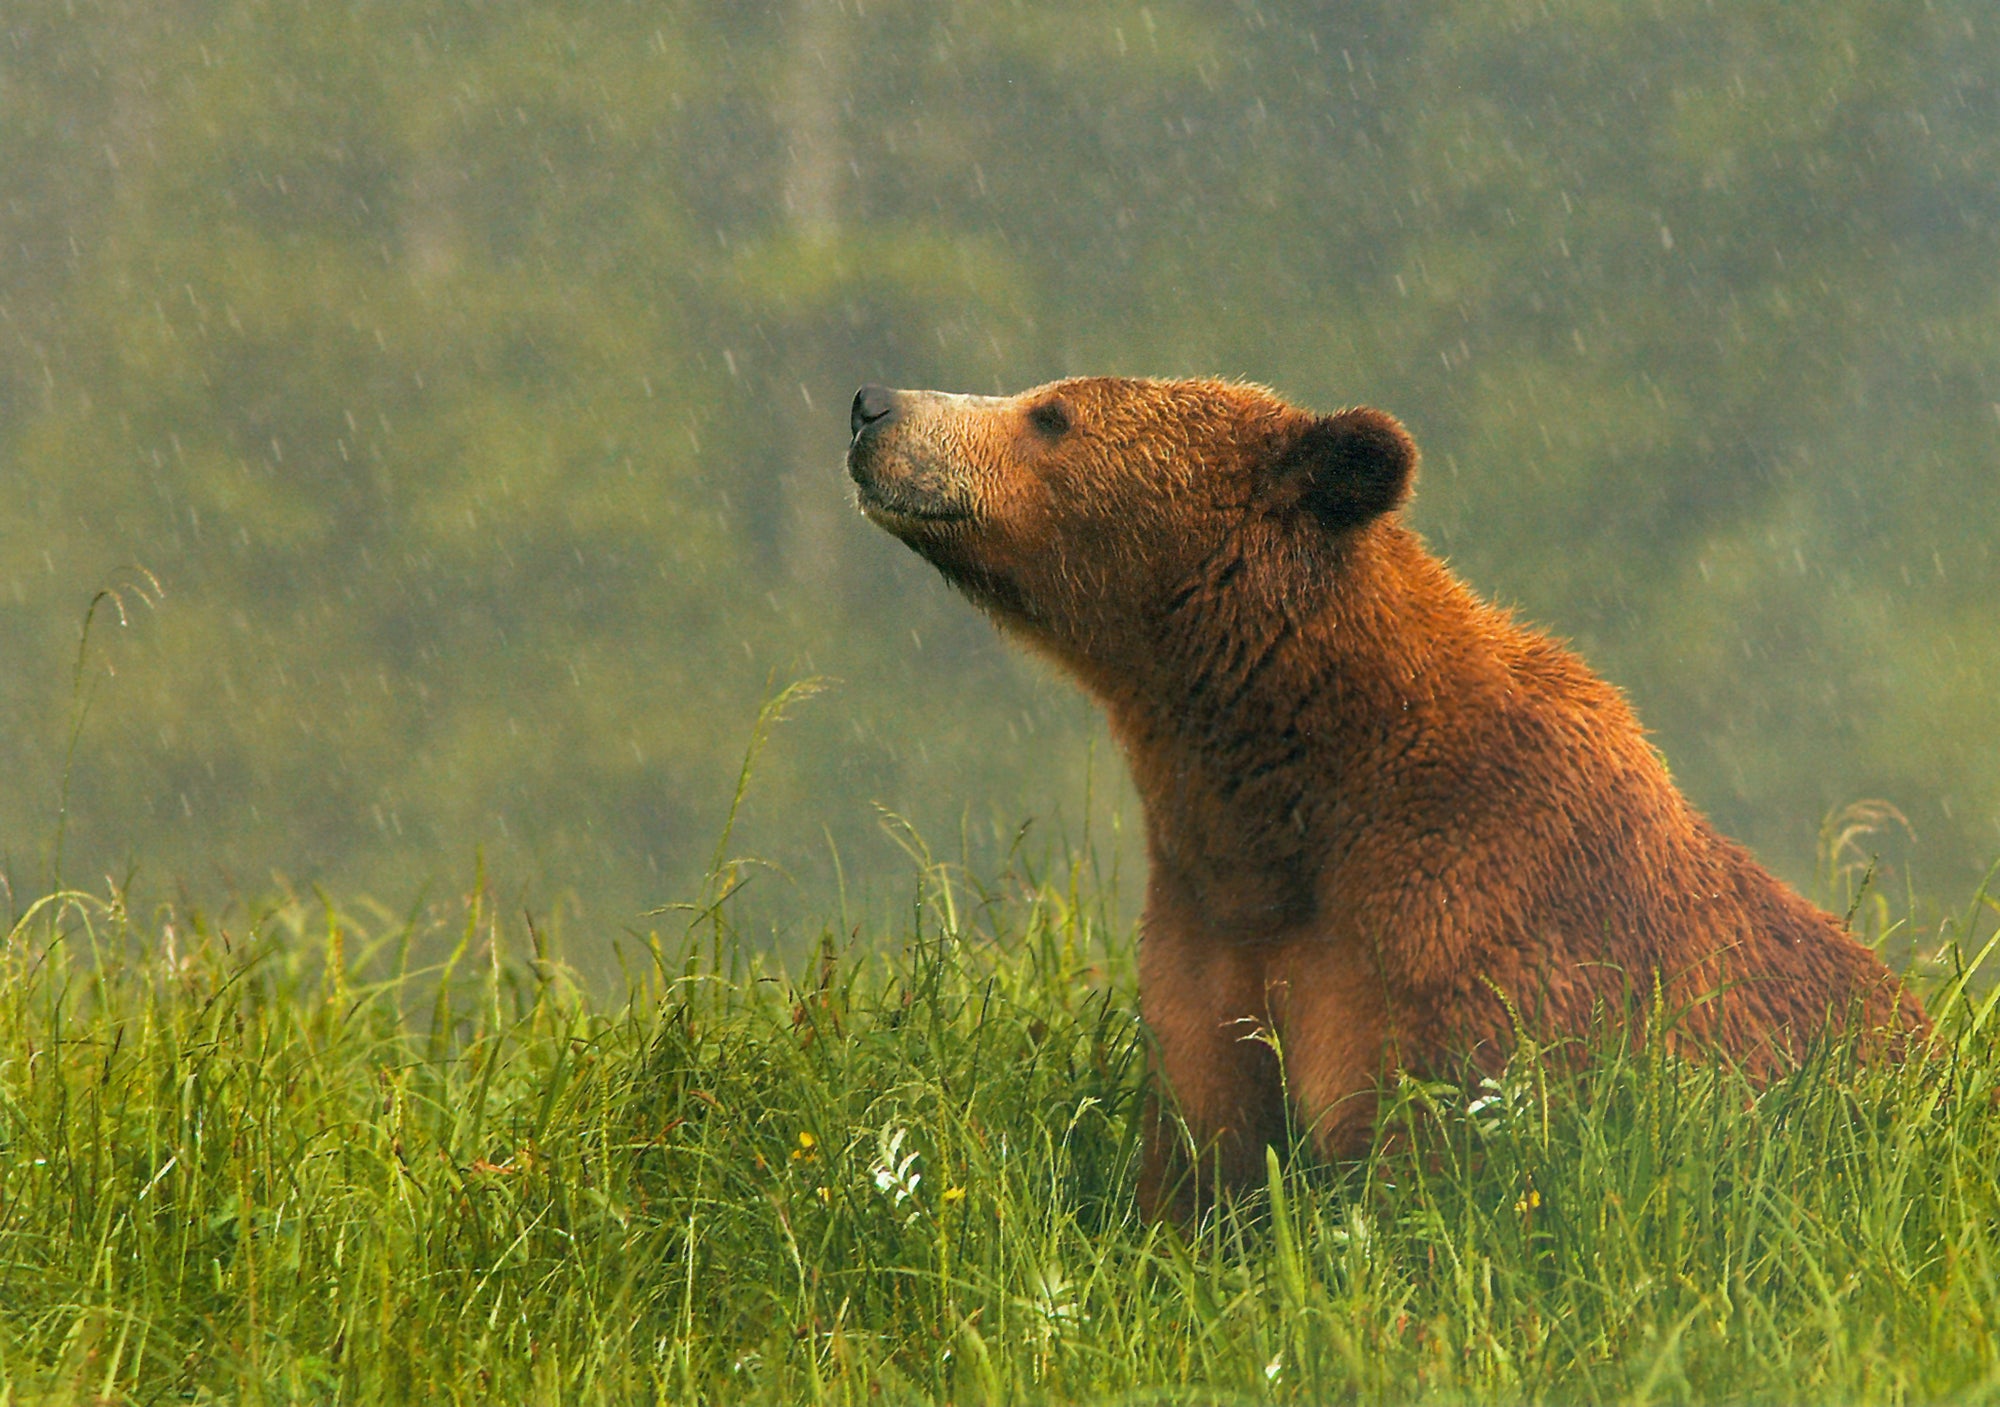 A photo of a grizzly bean siting in field in the middle of rain. End of image description.